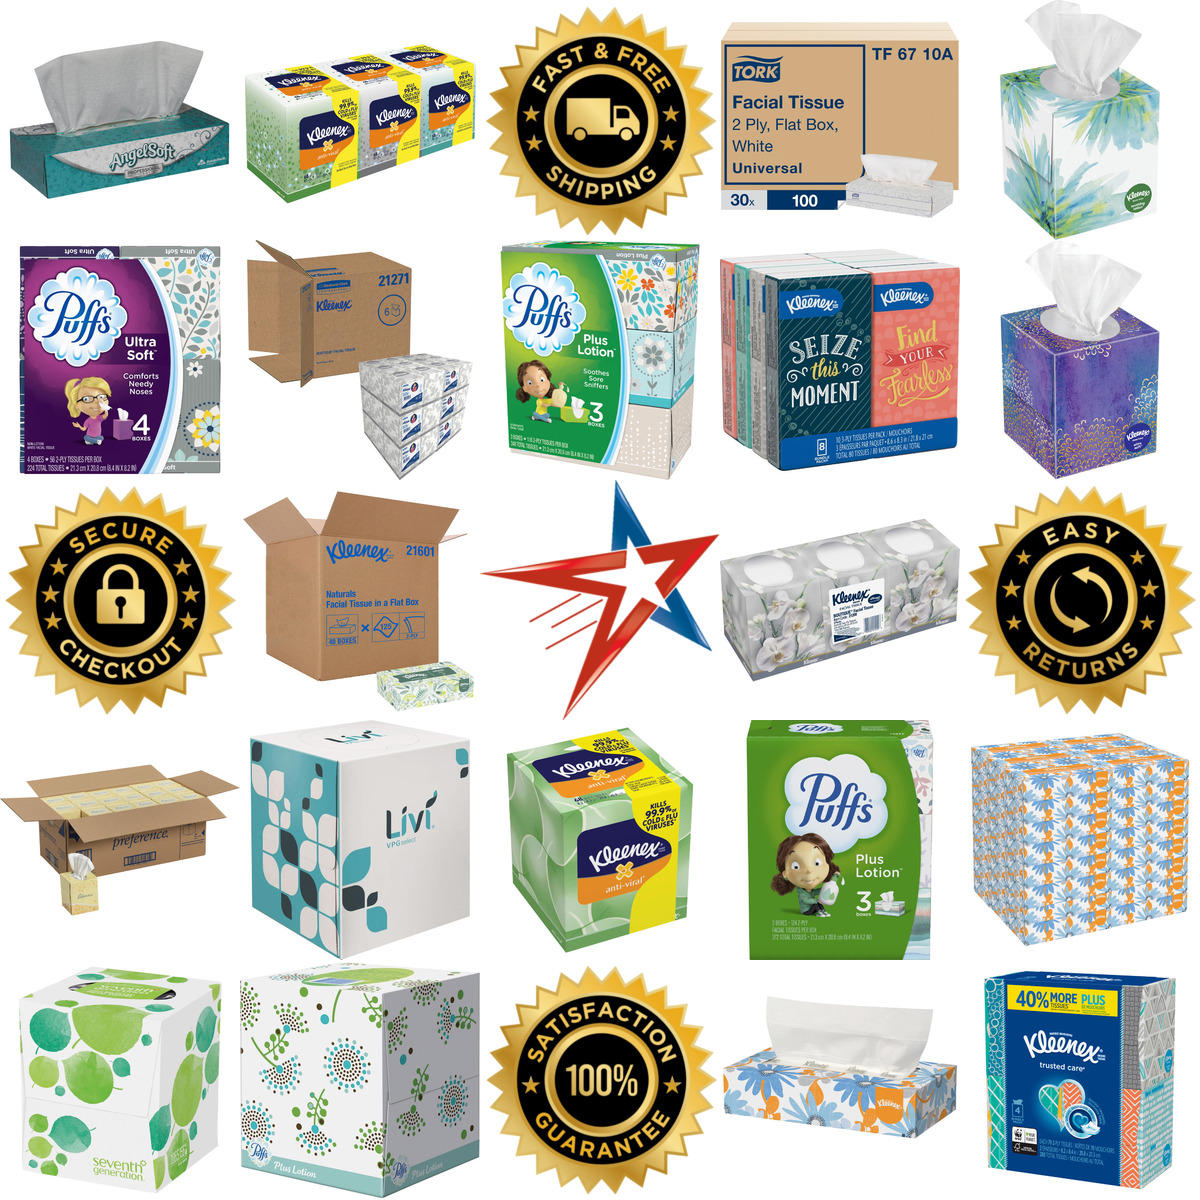 A selection of Facial Tissues products on GoVets